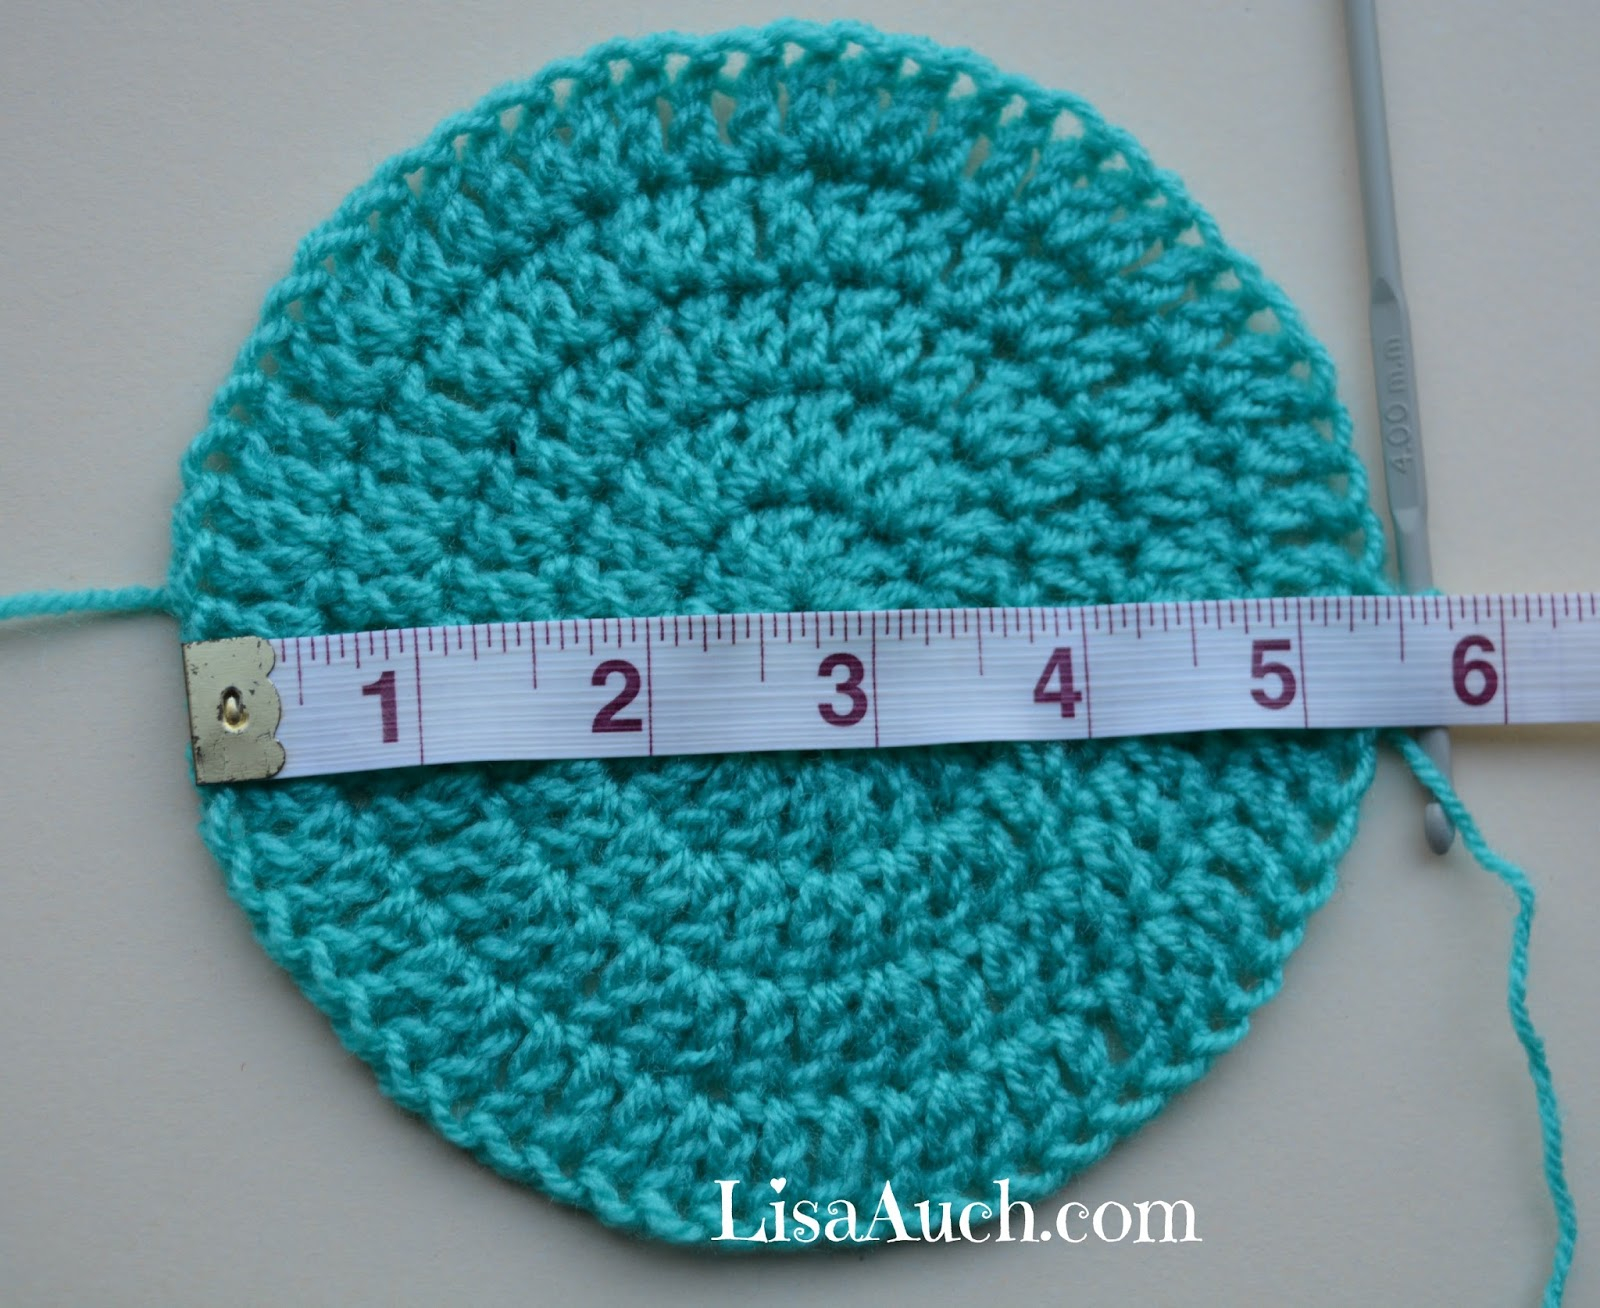 Free Crochet Hat Patterns For Adults Free Crochet Patterns And Designs Lisaauch Free Crochet Ba